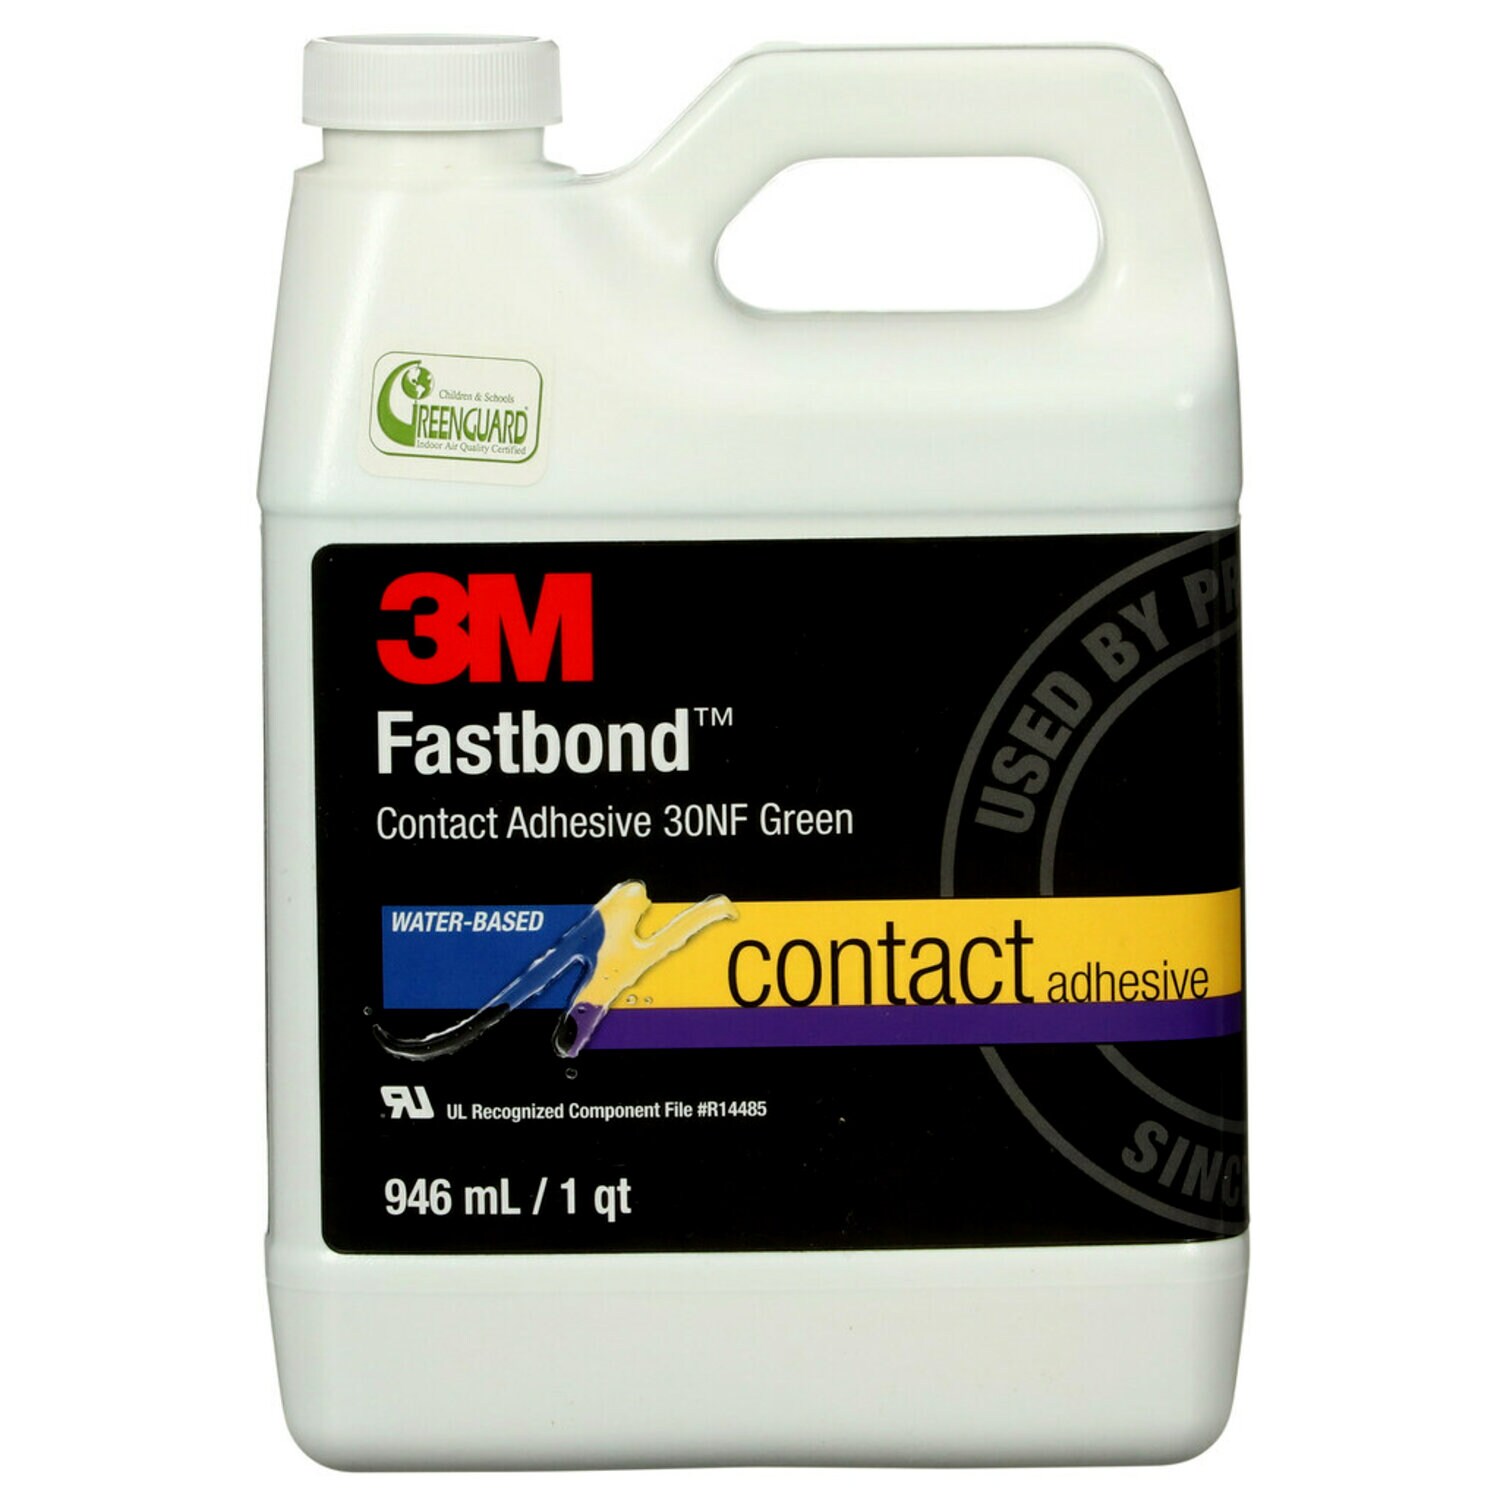 7100017732 - 3M Fastbond Contact Adhesive 30NF, Green, 1 Quart Can, 12/case